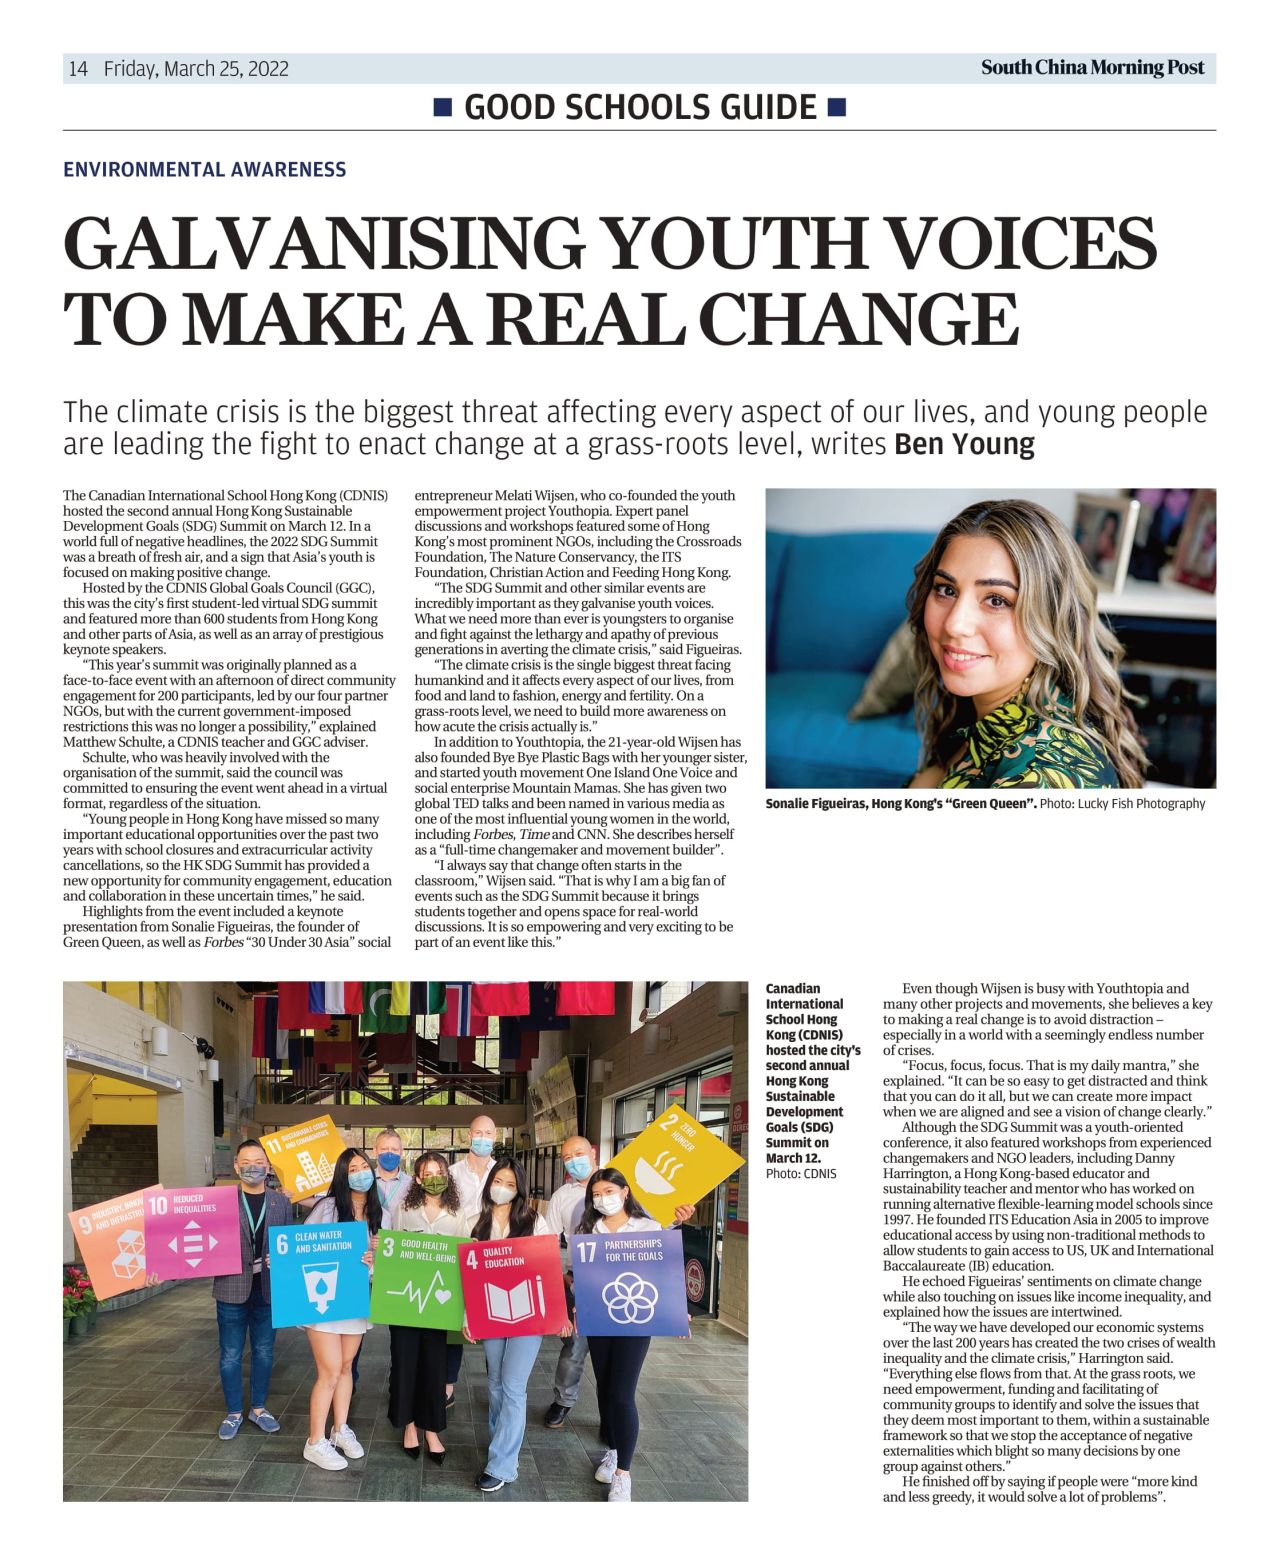 Newspaper Titled : Galvanizing Youth Voices to Make a Real Change